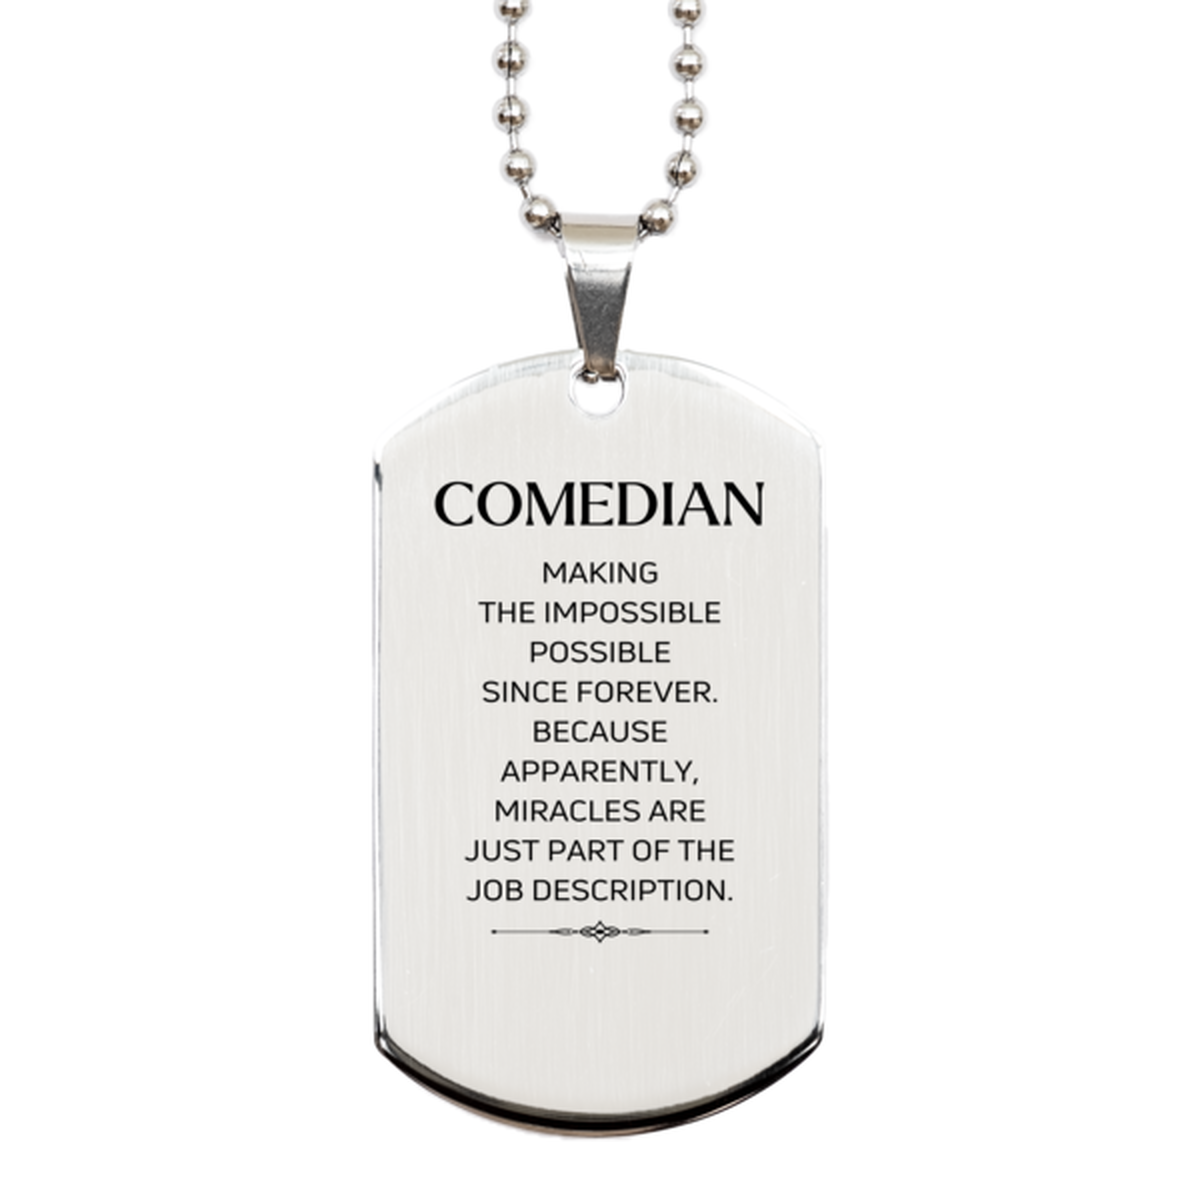 Funny Comedian Gifts, Miracles are just part of the job description, Inspirational Birthday Silver Dog Tag For Comedian, Men, Women, Coworkers, Friends, Boss